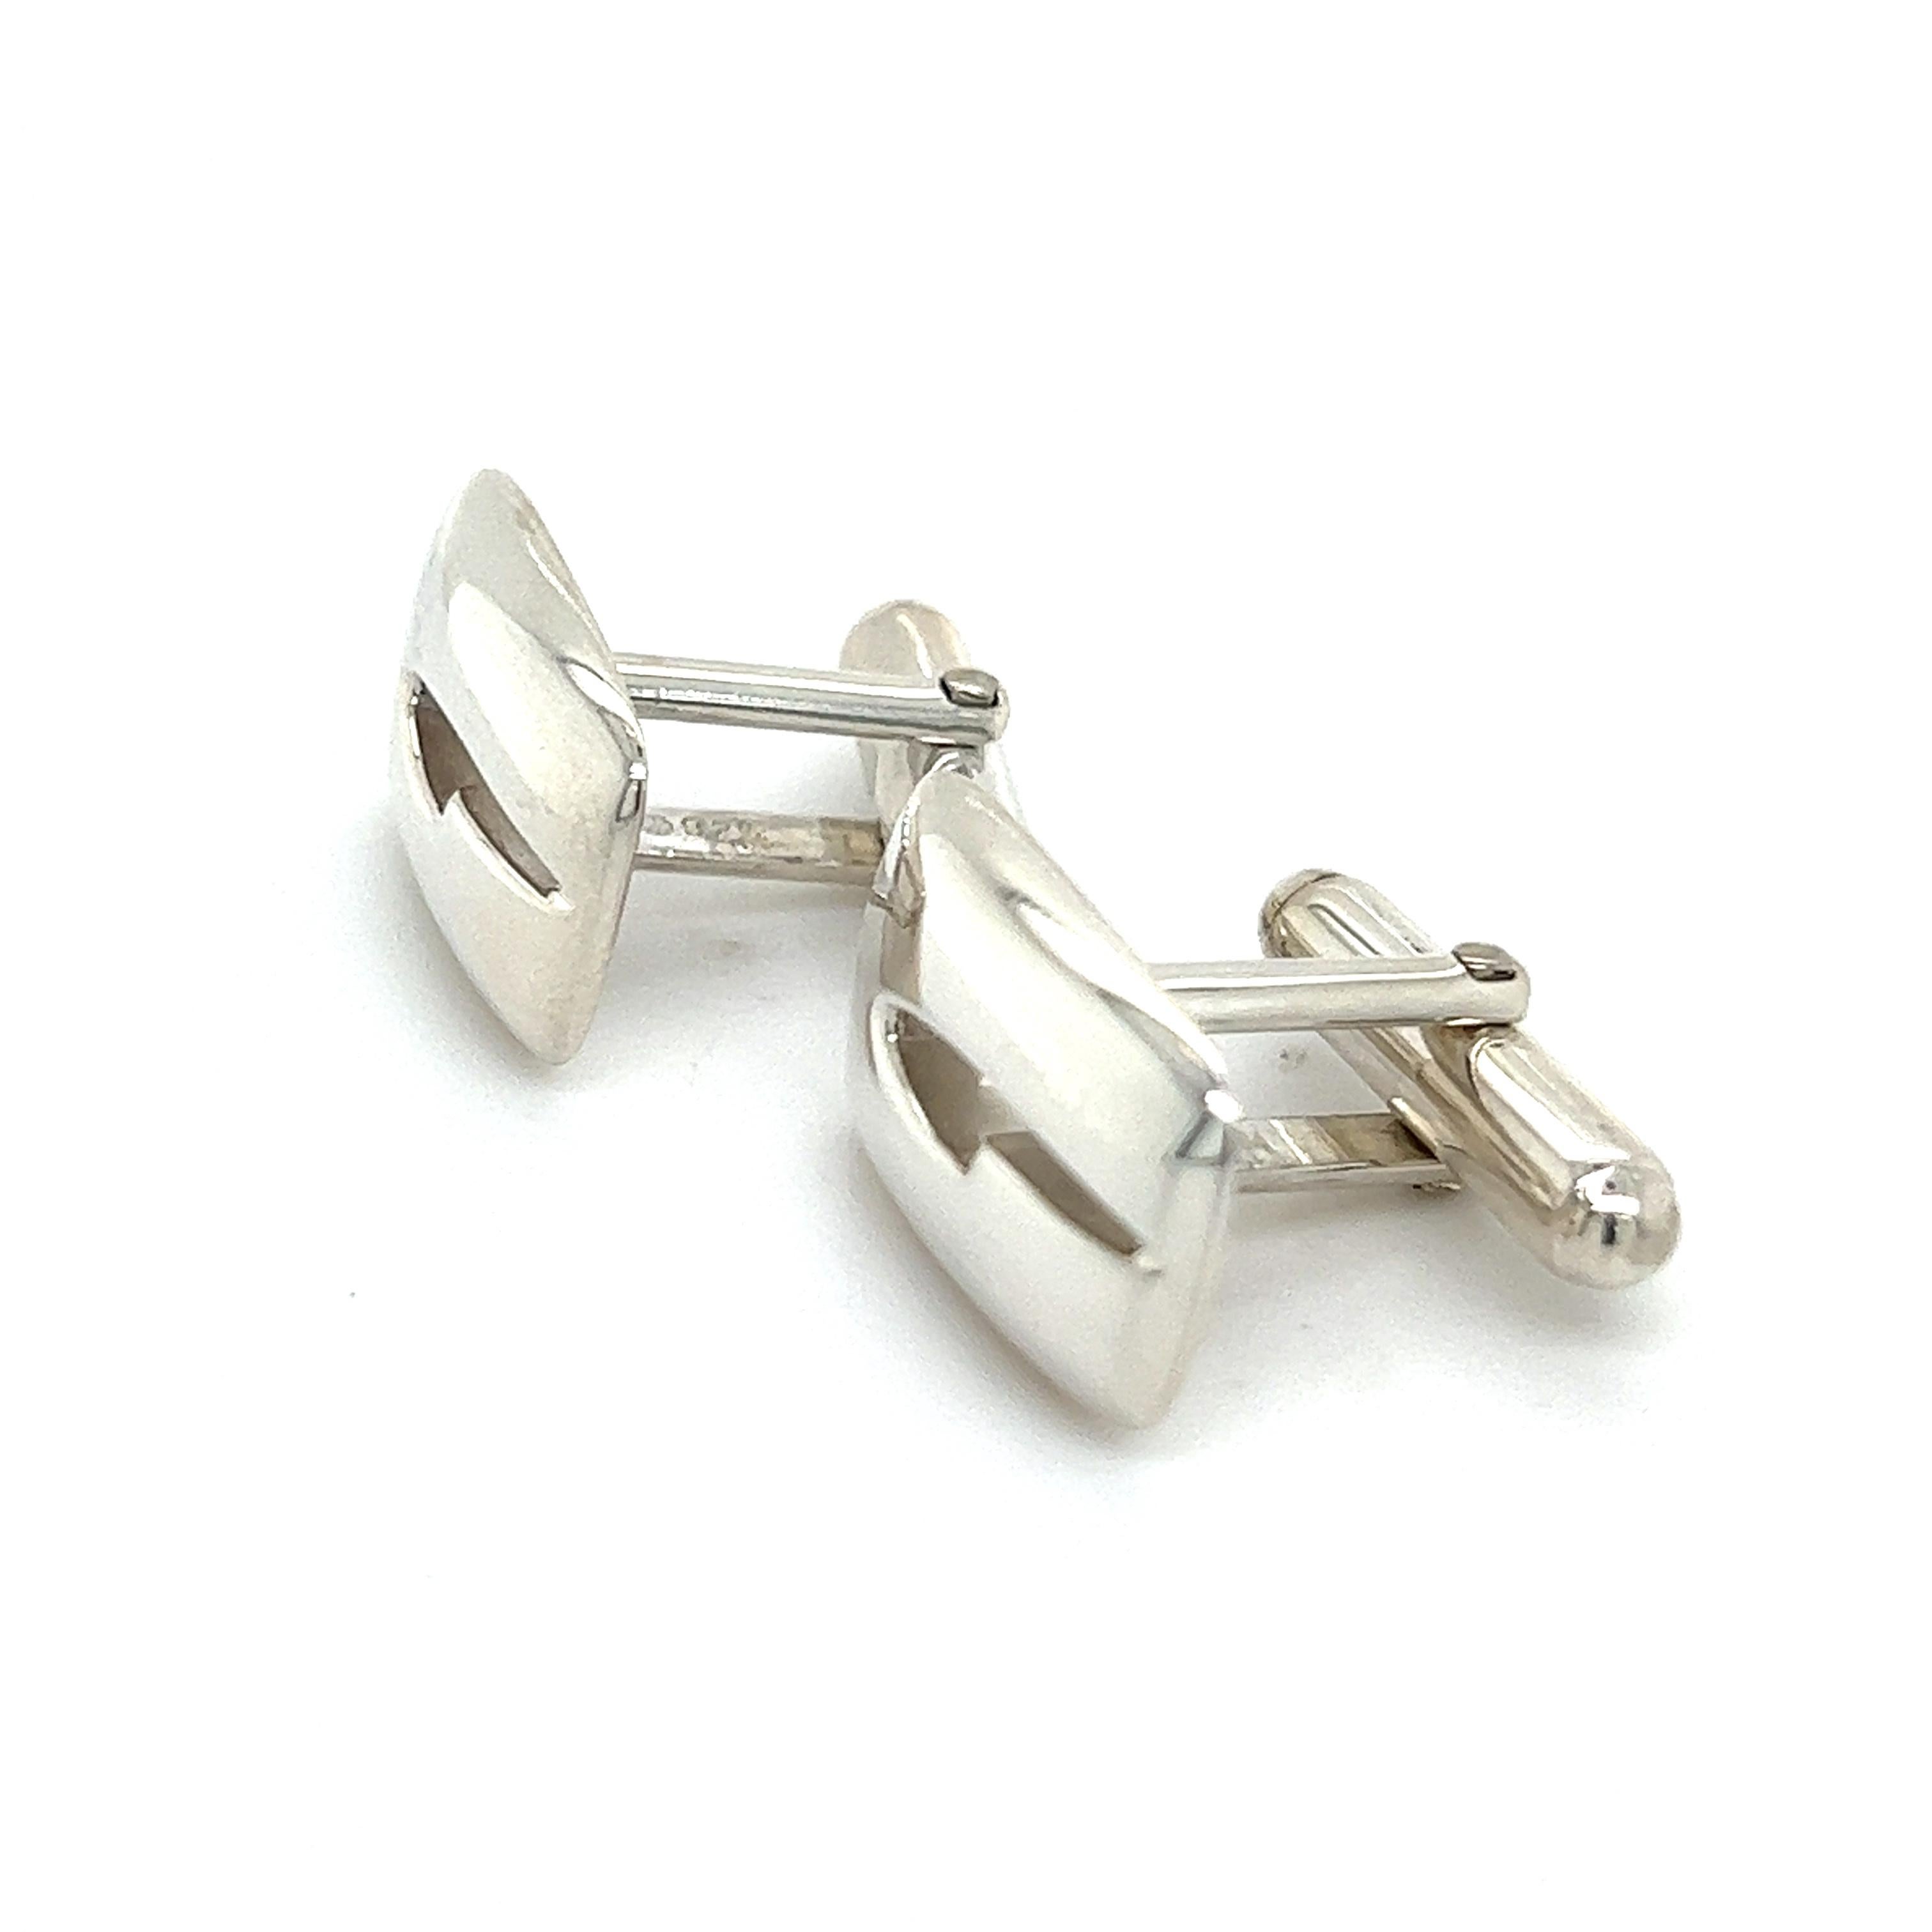 Authentic Gucci Estate Mens Cufflinks Silver G18

These elegant Authentic Gucci cufflinks are made of sterling silver and have a weight of 12 grams.

TRUSTED SELLER SINCE 2002

PLEASE SEE OUR HUNDREDS OF POSITIVE FEEDBACKS FROM OUR CLIENTS!!

FREE